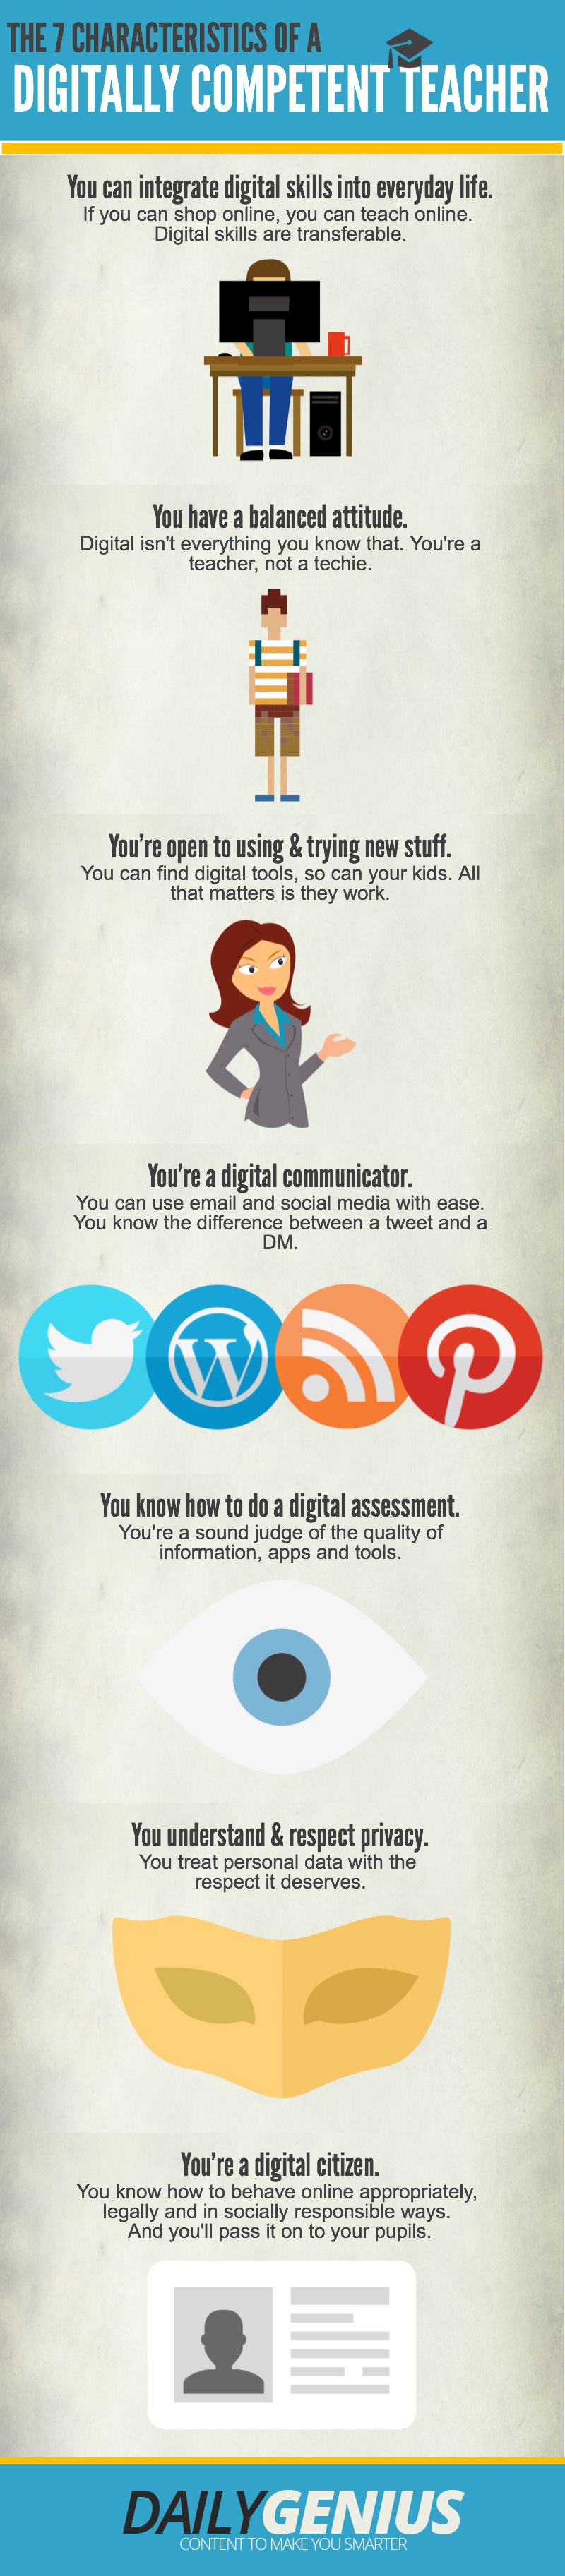 The-Characteristics-of-a-Digitally-Competent-Teacher-Infographic